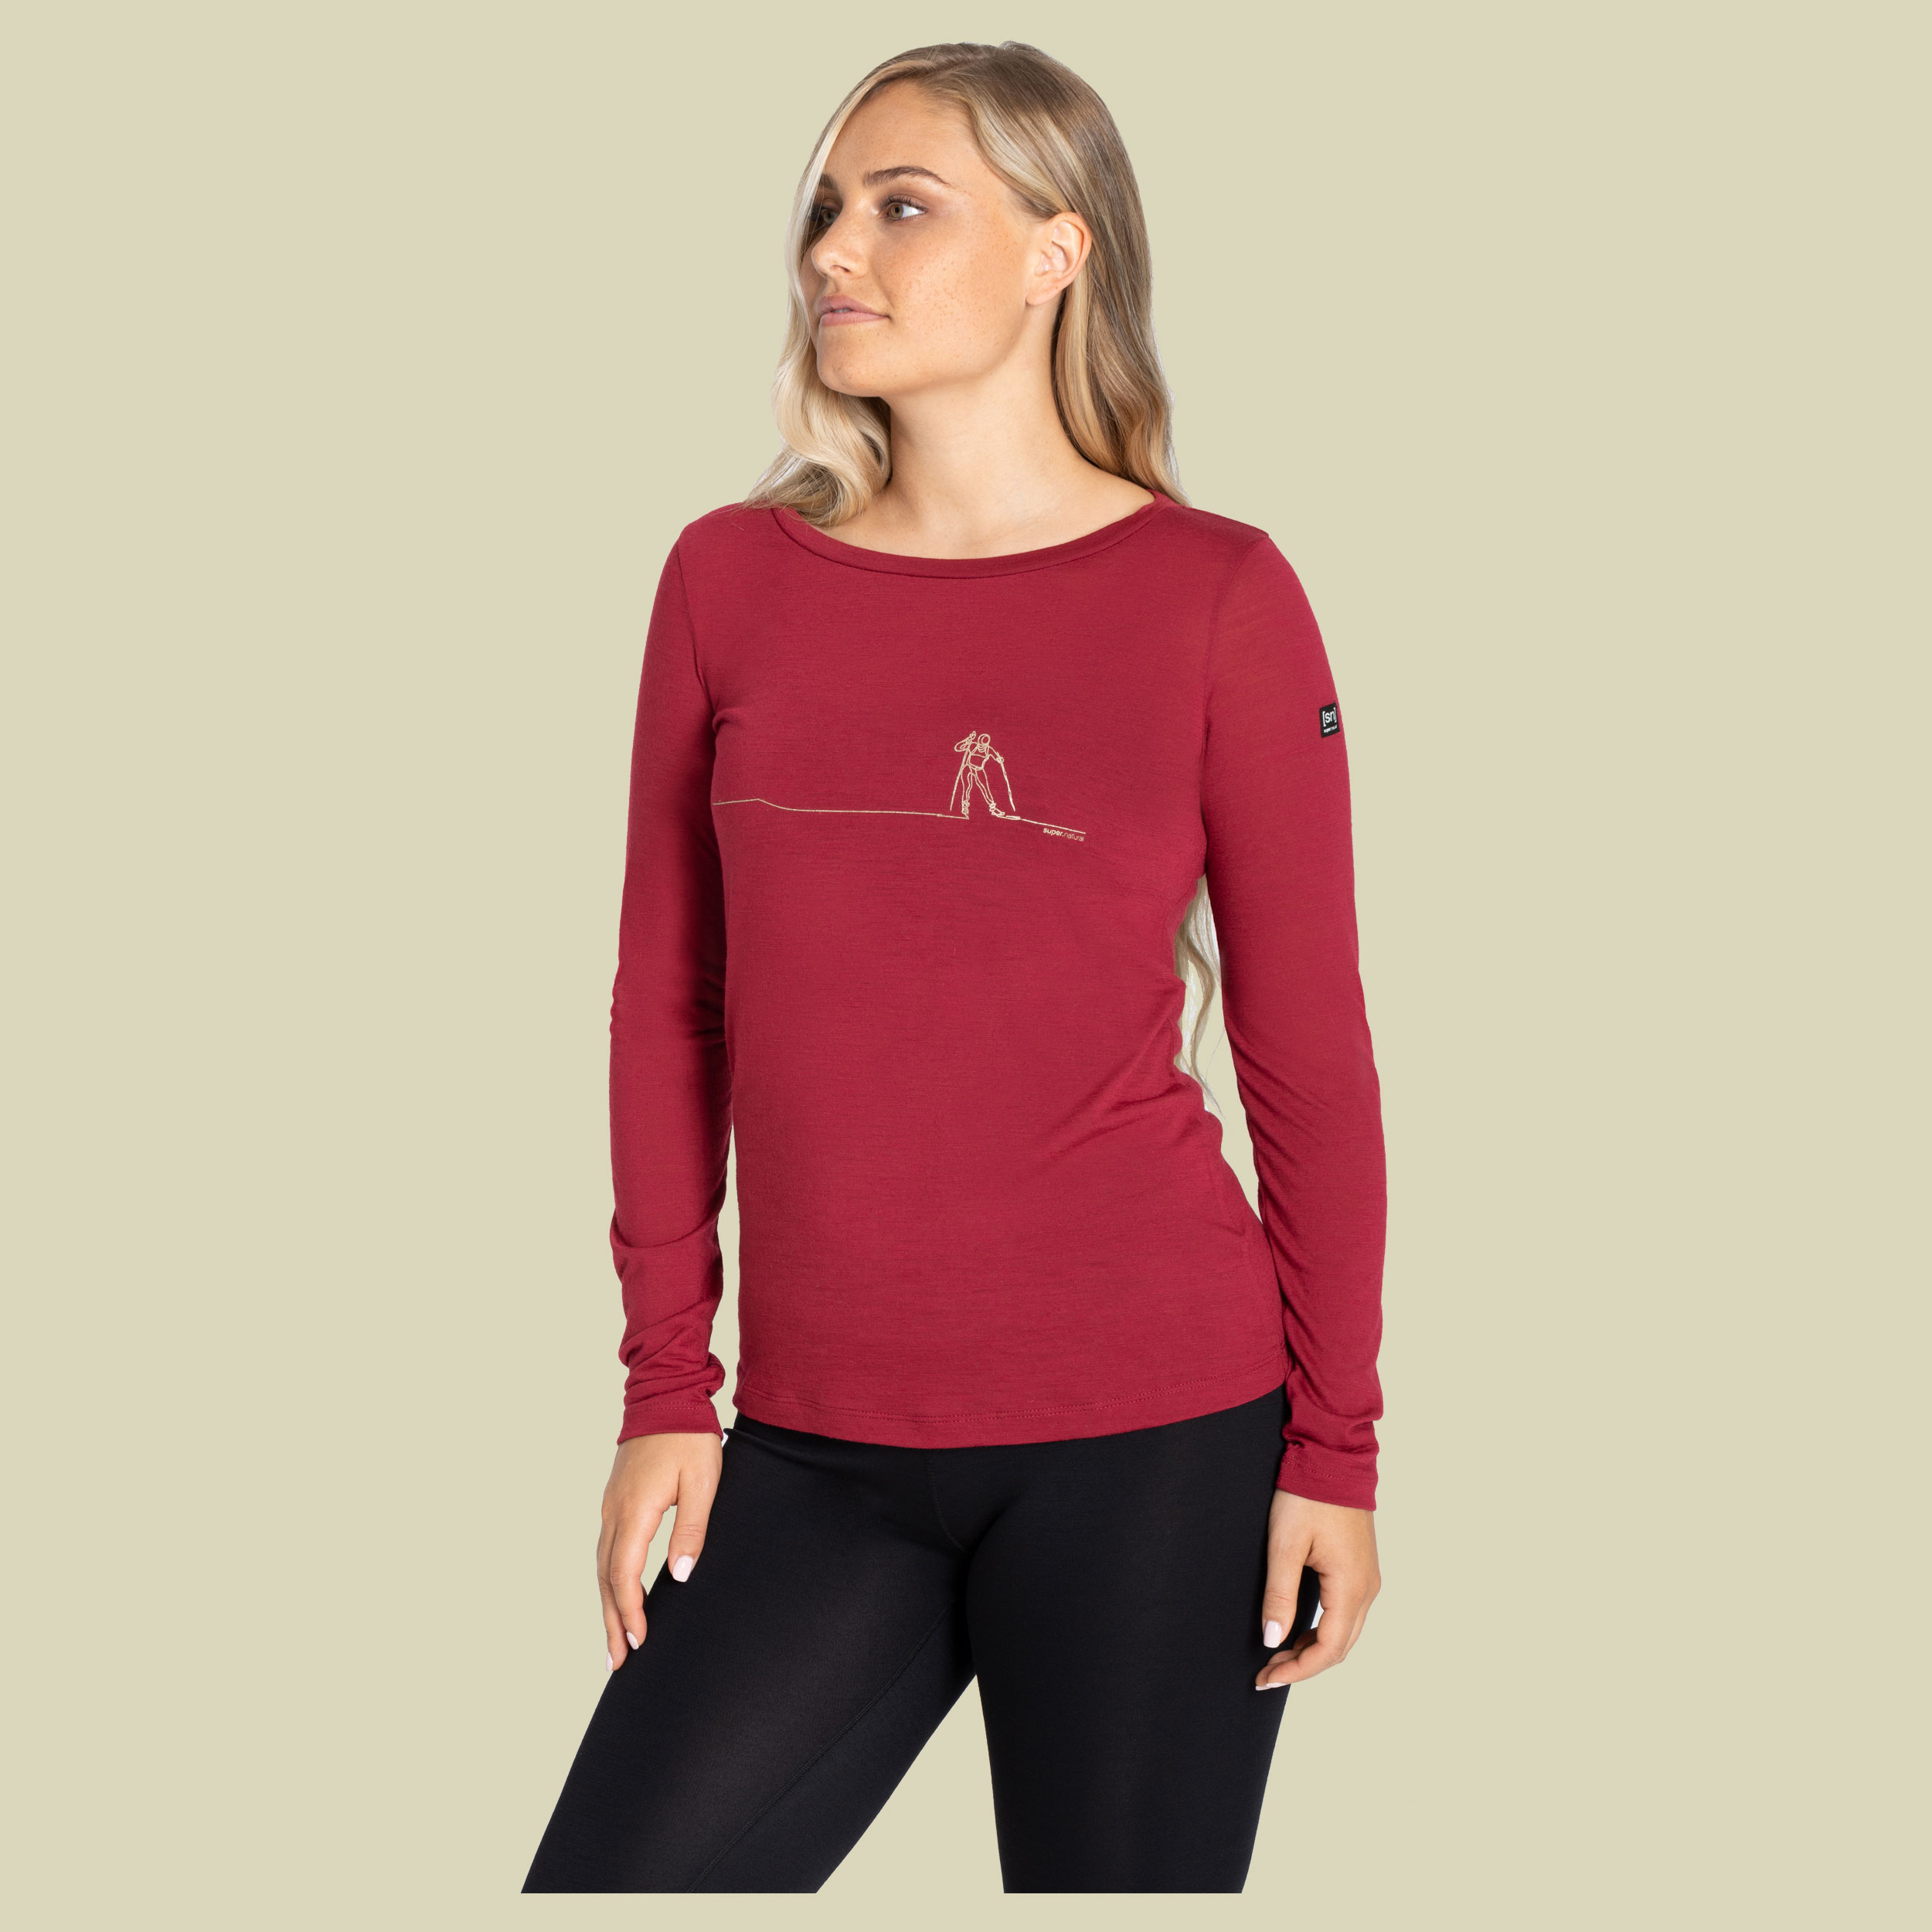 Cross Country LS Women Größe M  Farbe rumba red/gold